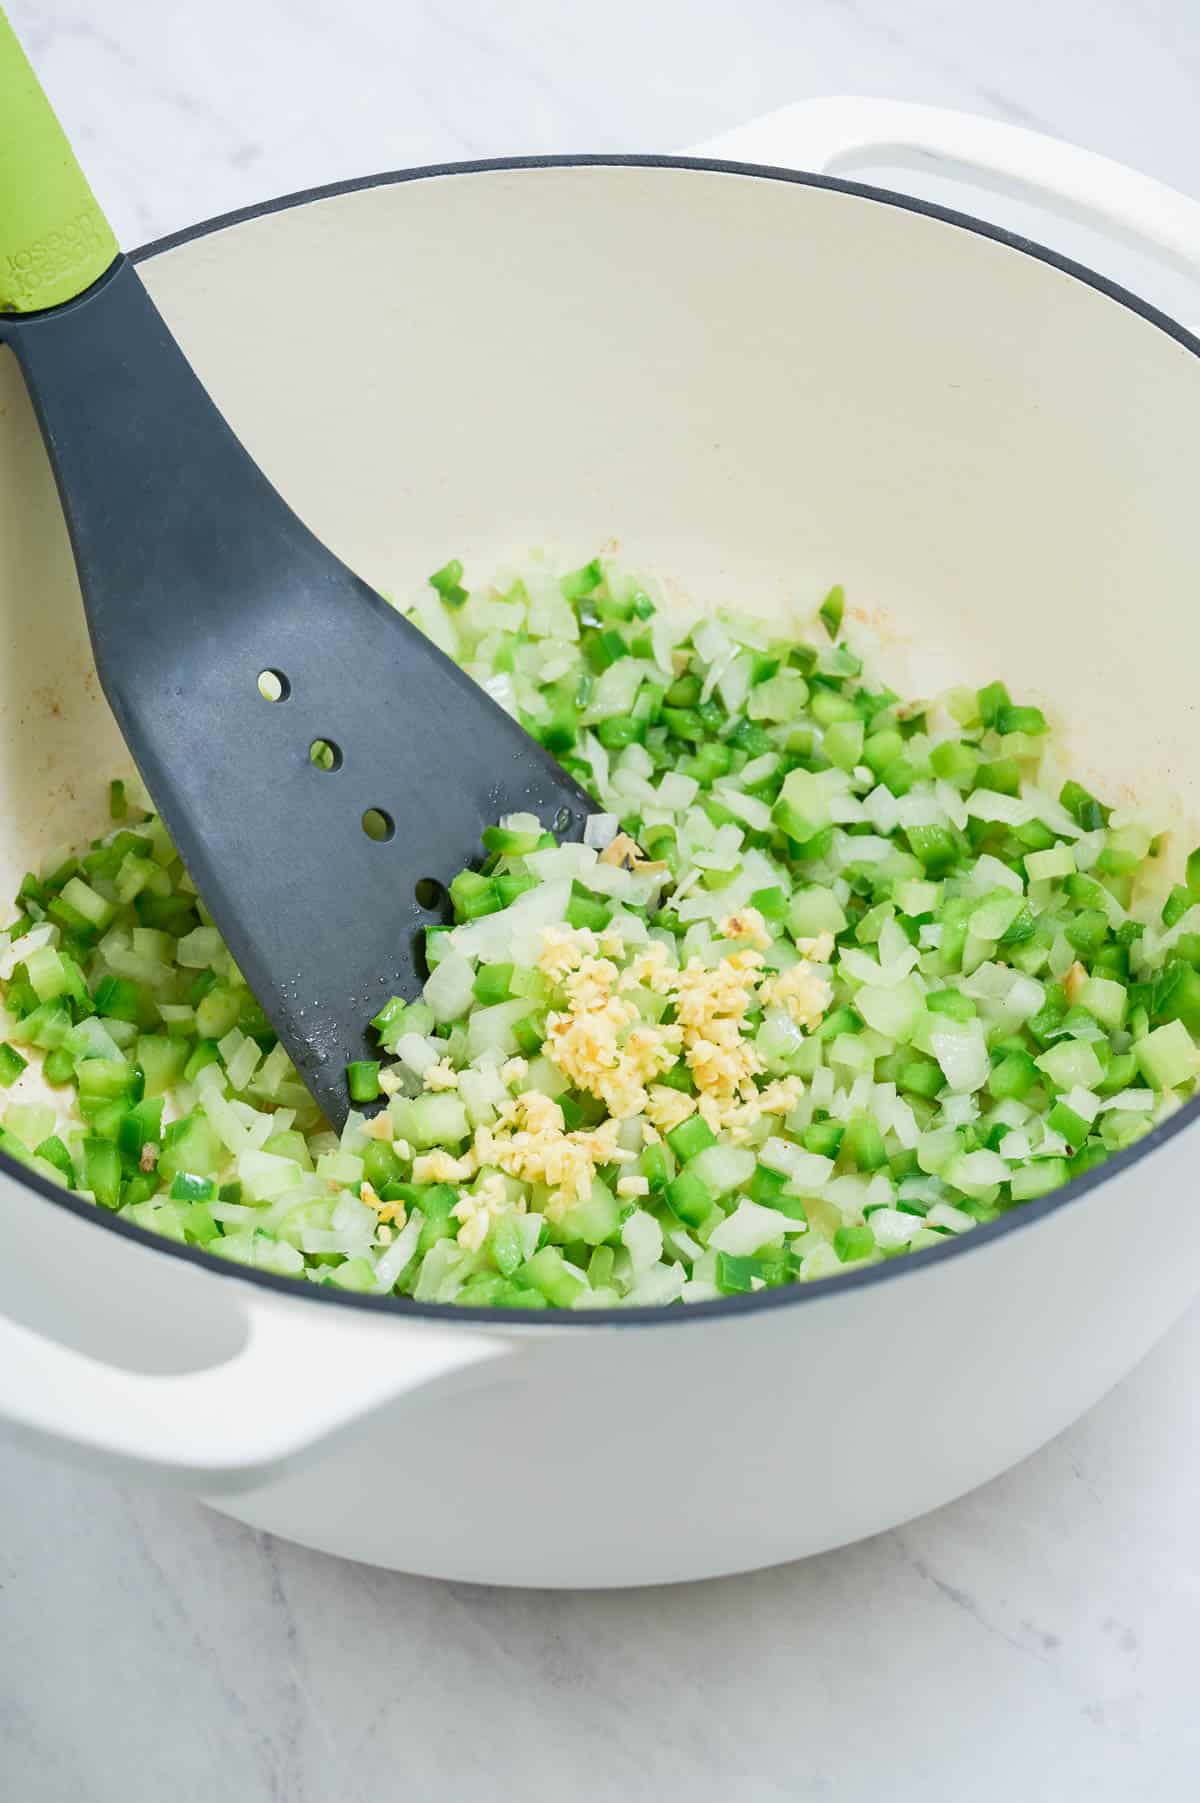 Garlic is added to the onion, celery, and bell pepper.